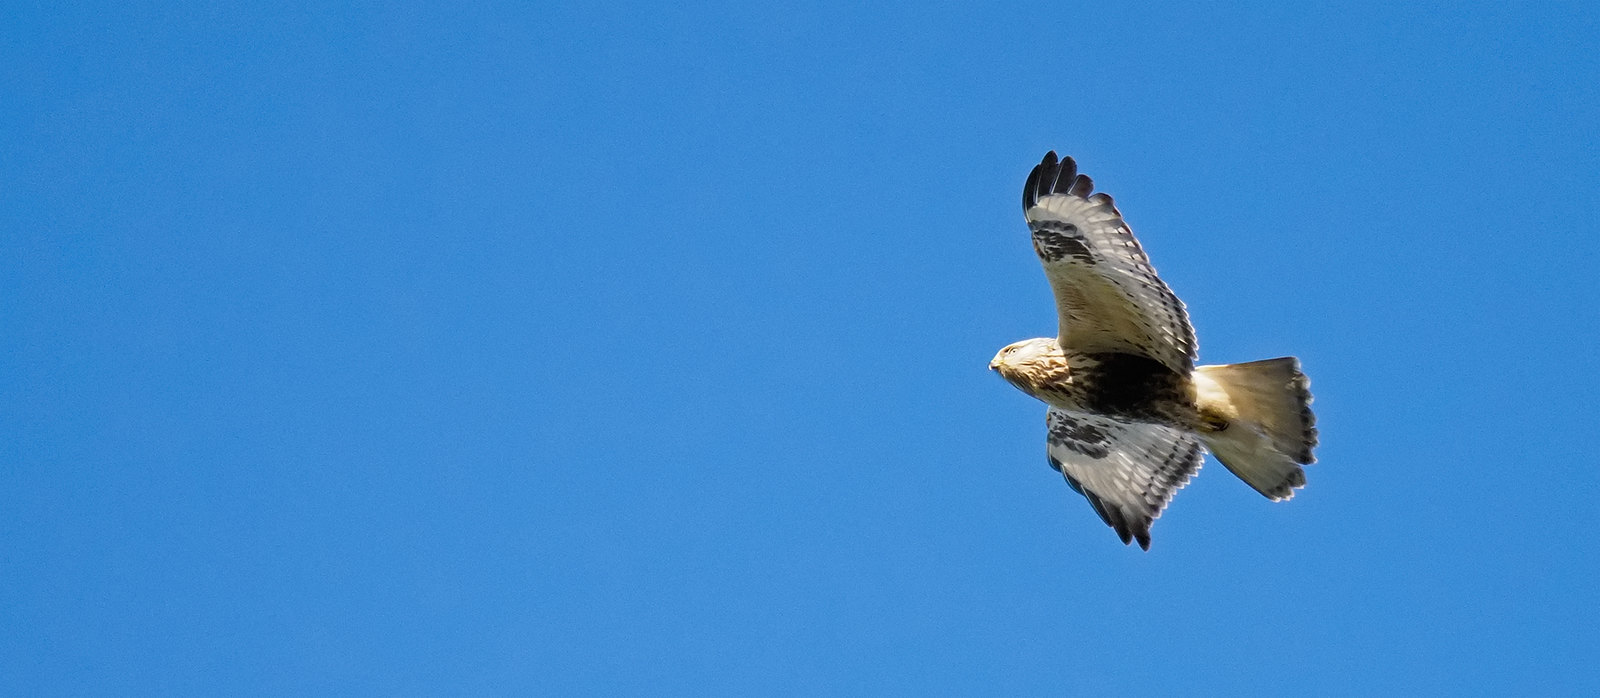 Rough-legged Buzzard - not epic but shows underwing pattern and tail